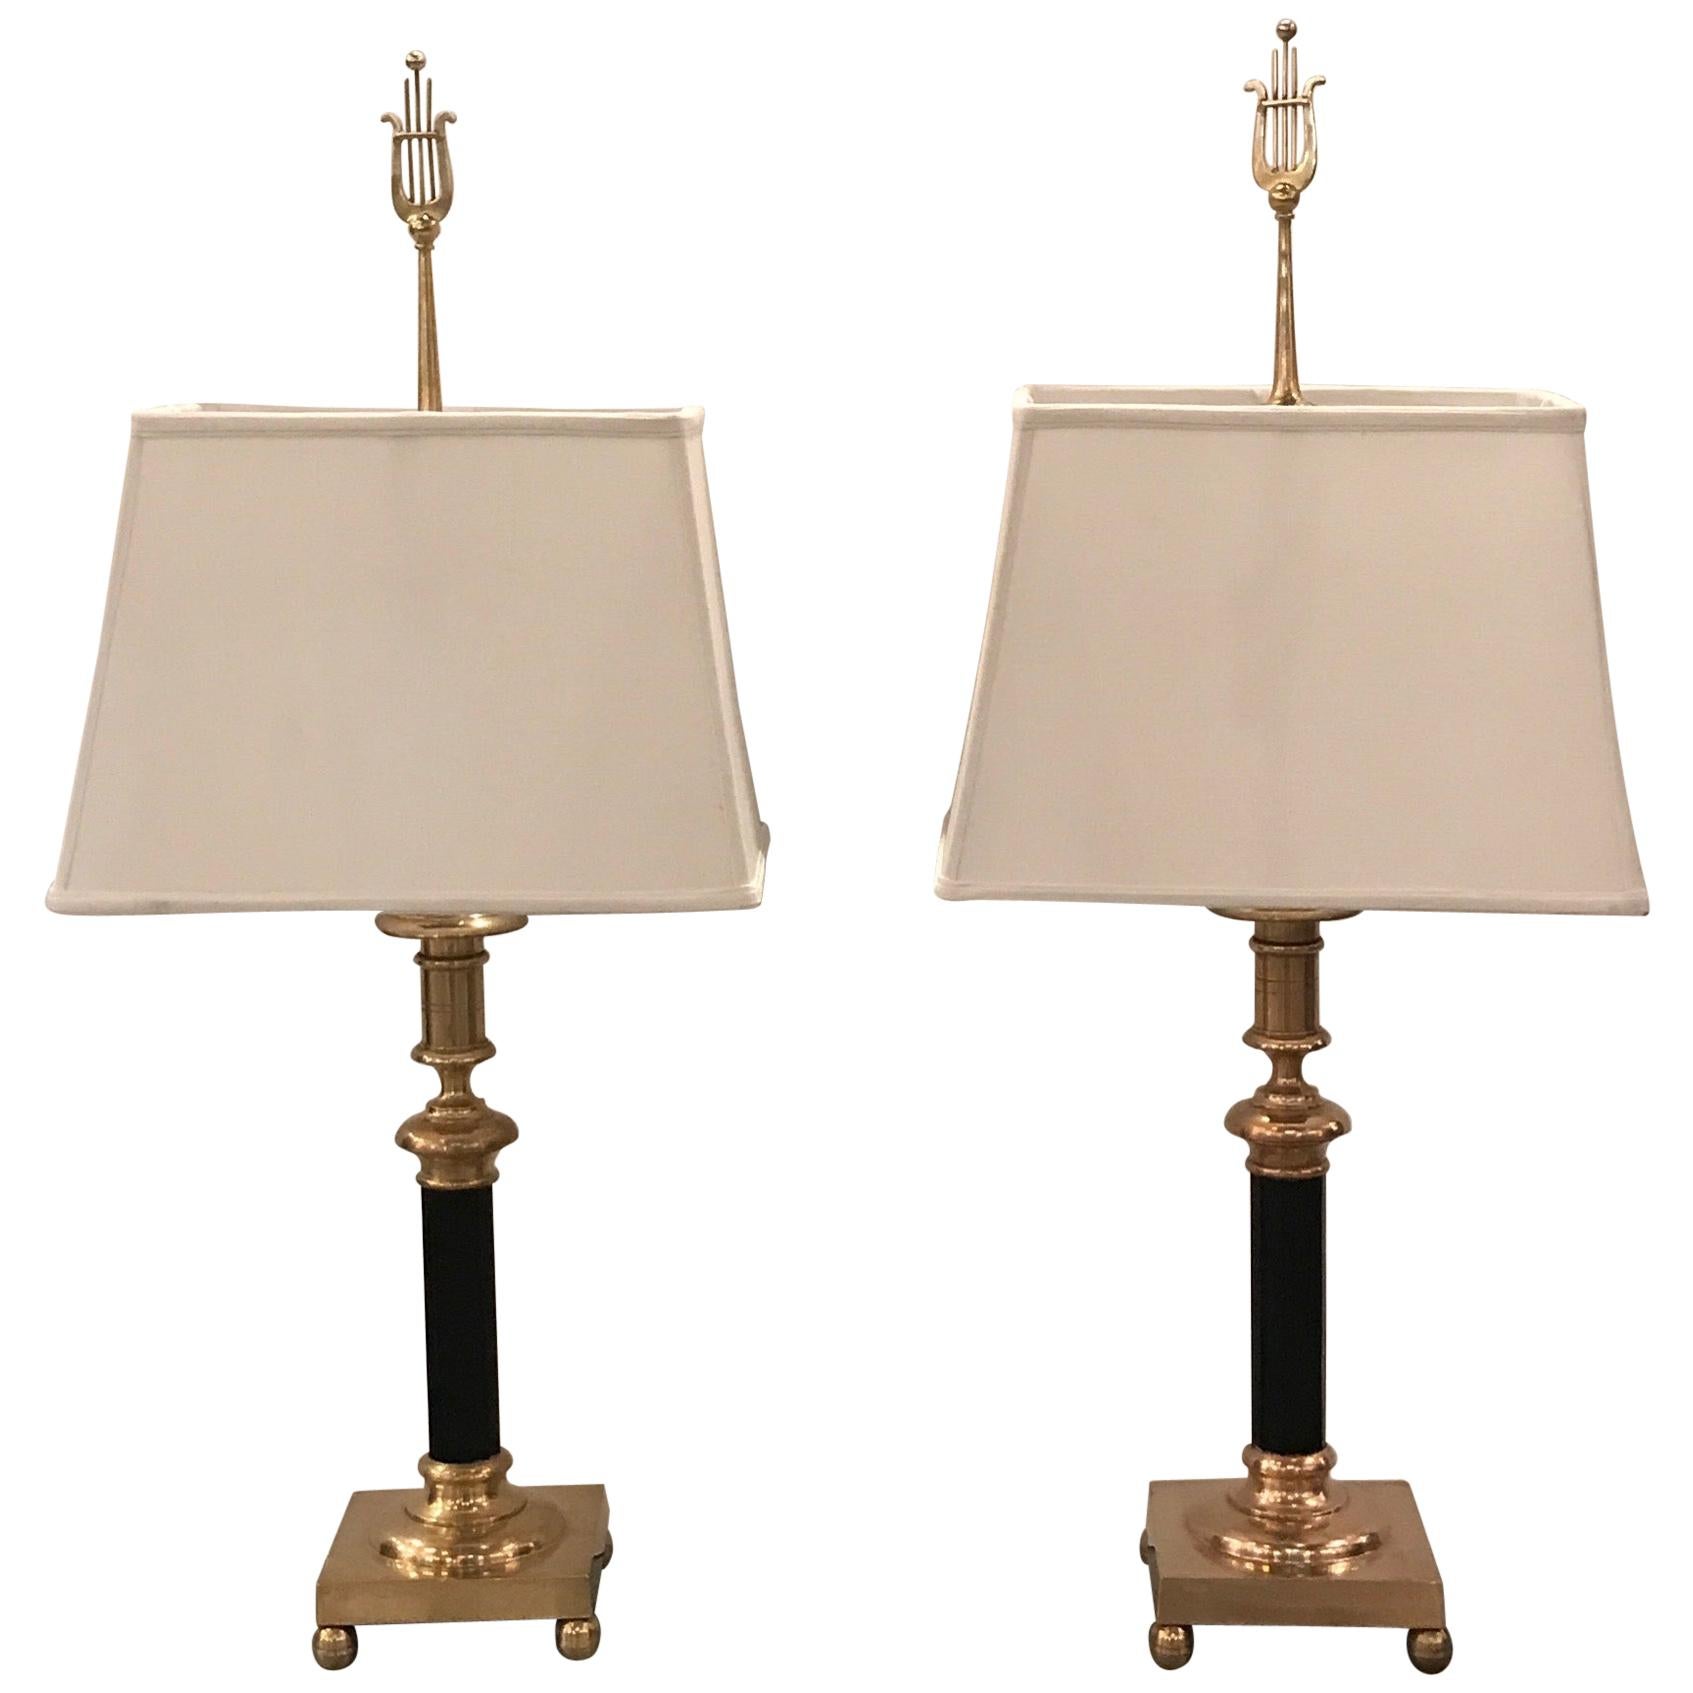 Pair of Cast Brass Table Lamps by Chapman